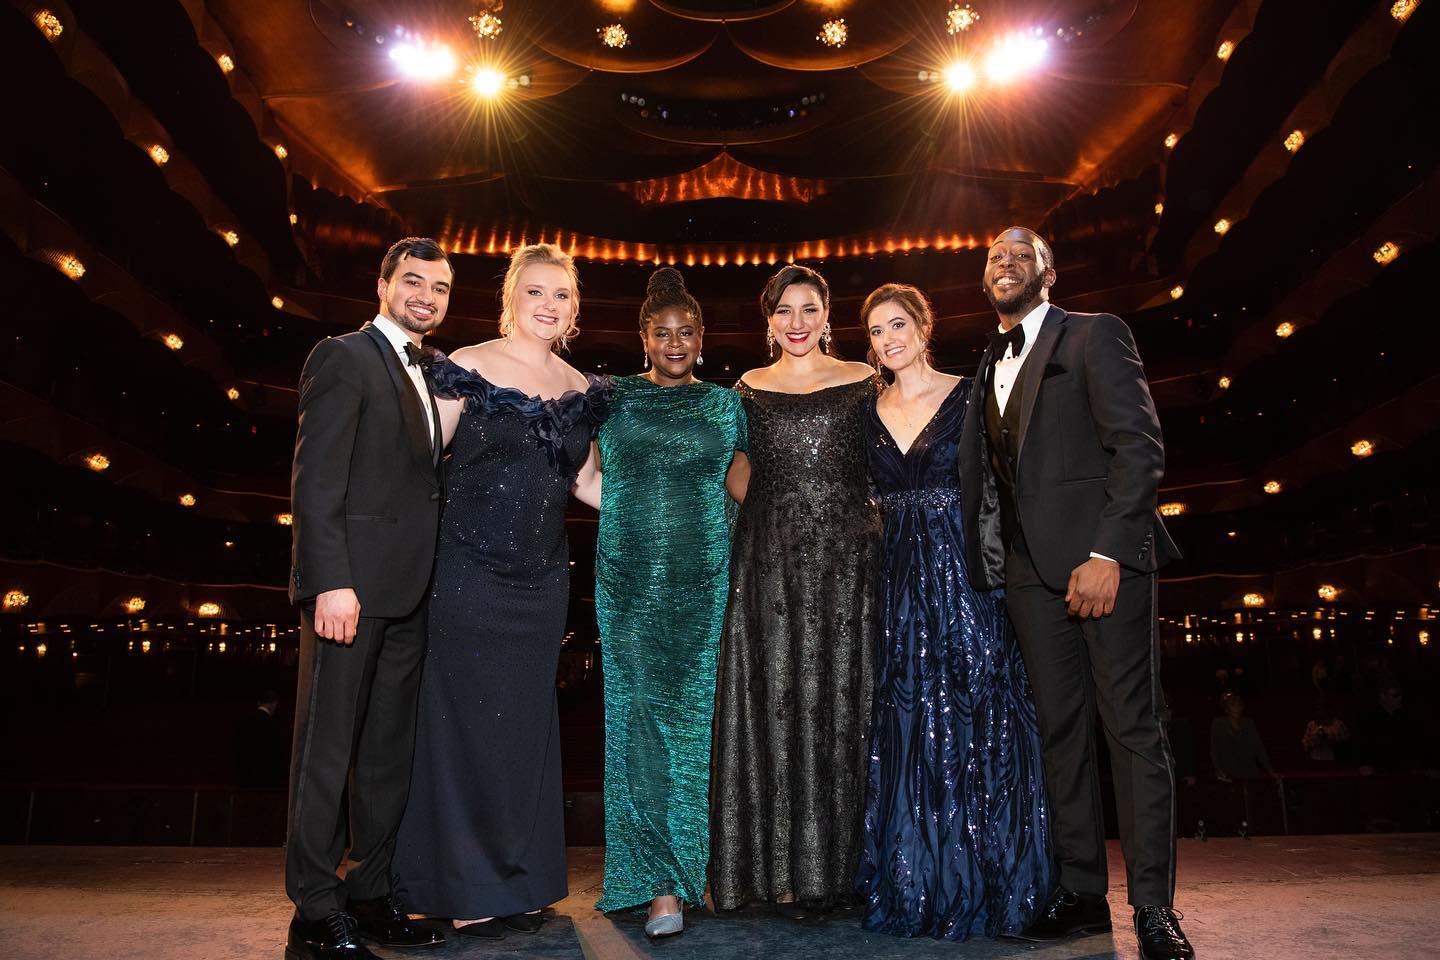 2023 Laffont Competition winners are Anthony León, Tenor; Teresa Perrotta, Soprano; Natalie Lewis, Mezzo-Soprano; Sarah Saturnino, Mezzo-Soprano; Meredith Wohlgemuth, Soprano; and Christian Simmons, Bass-Baritone